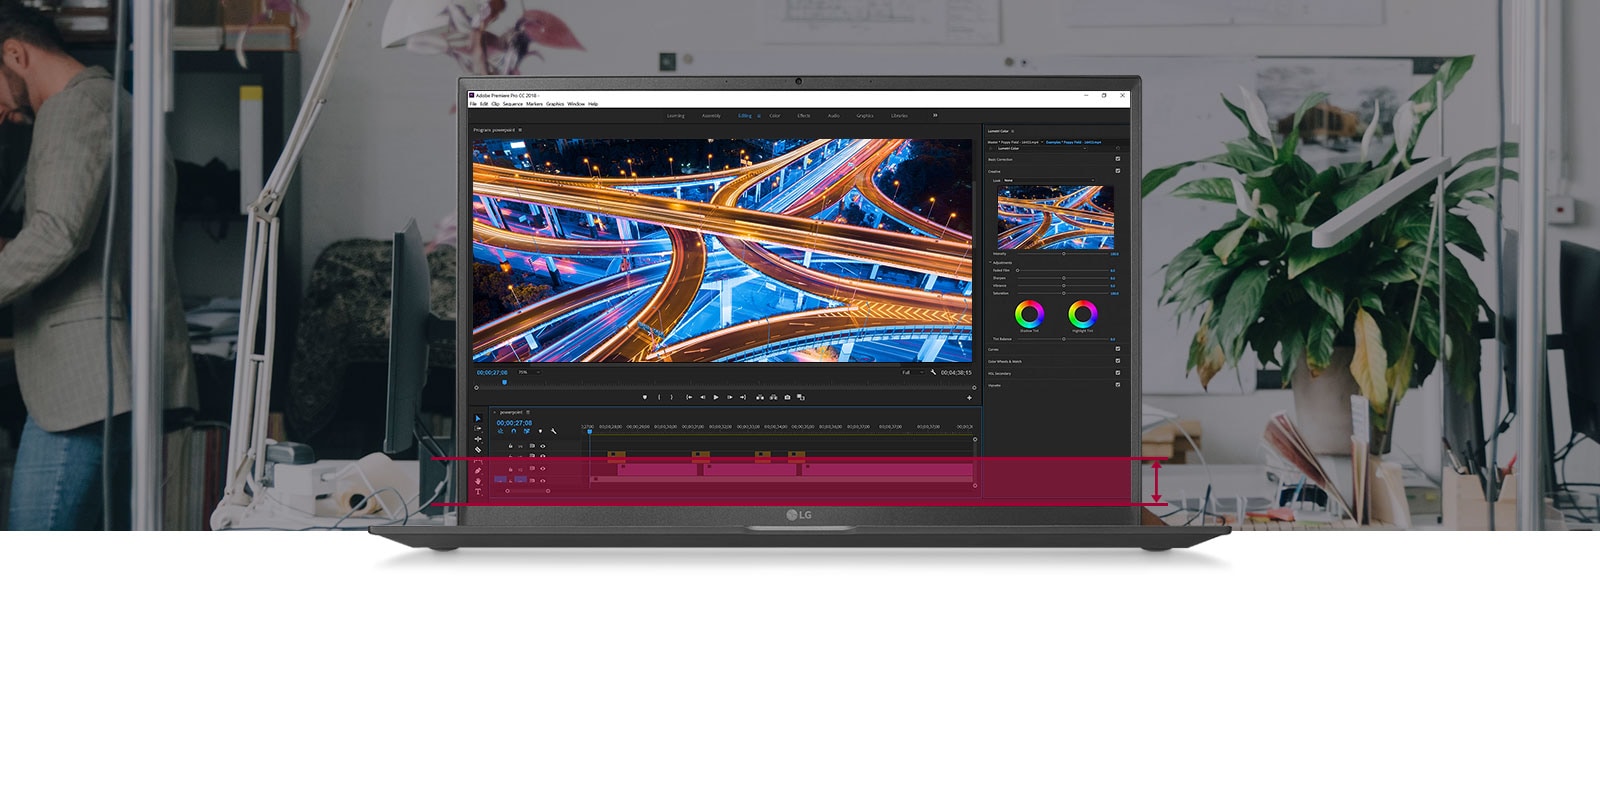 16:10 Large Screen allowing you to see more information without having to scroll down for your video editing work